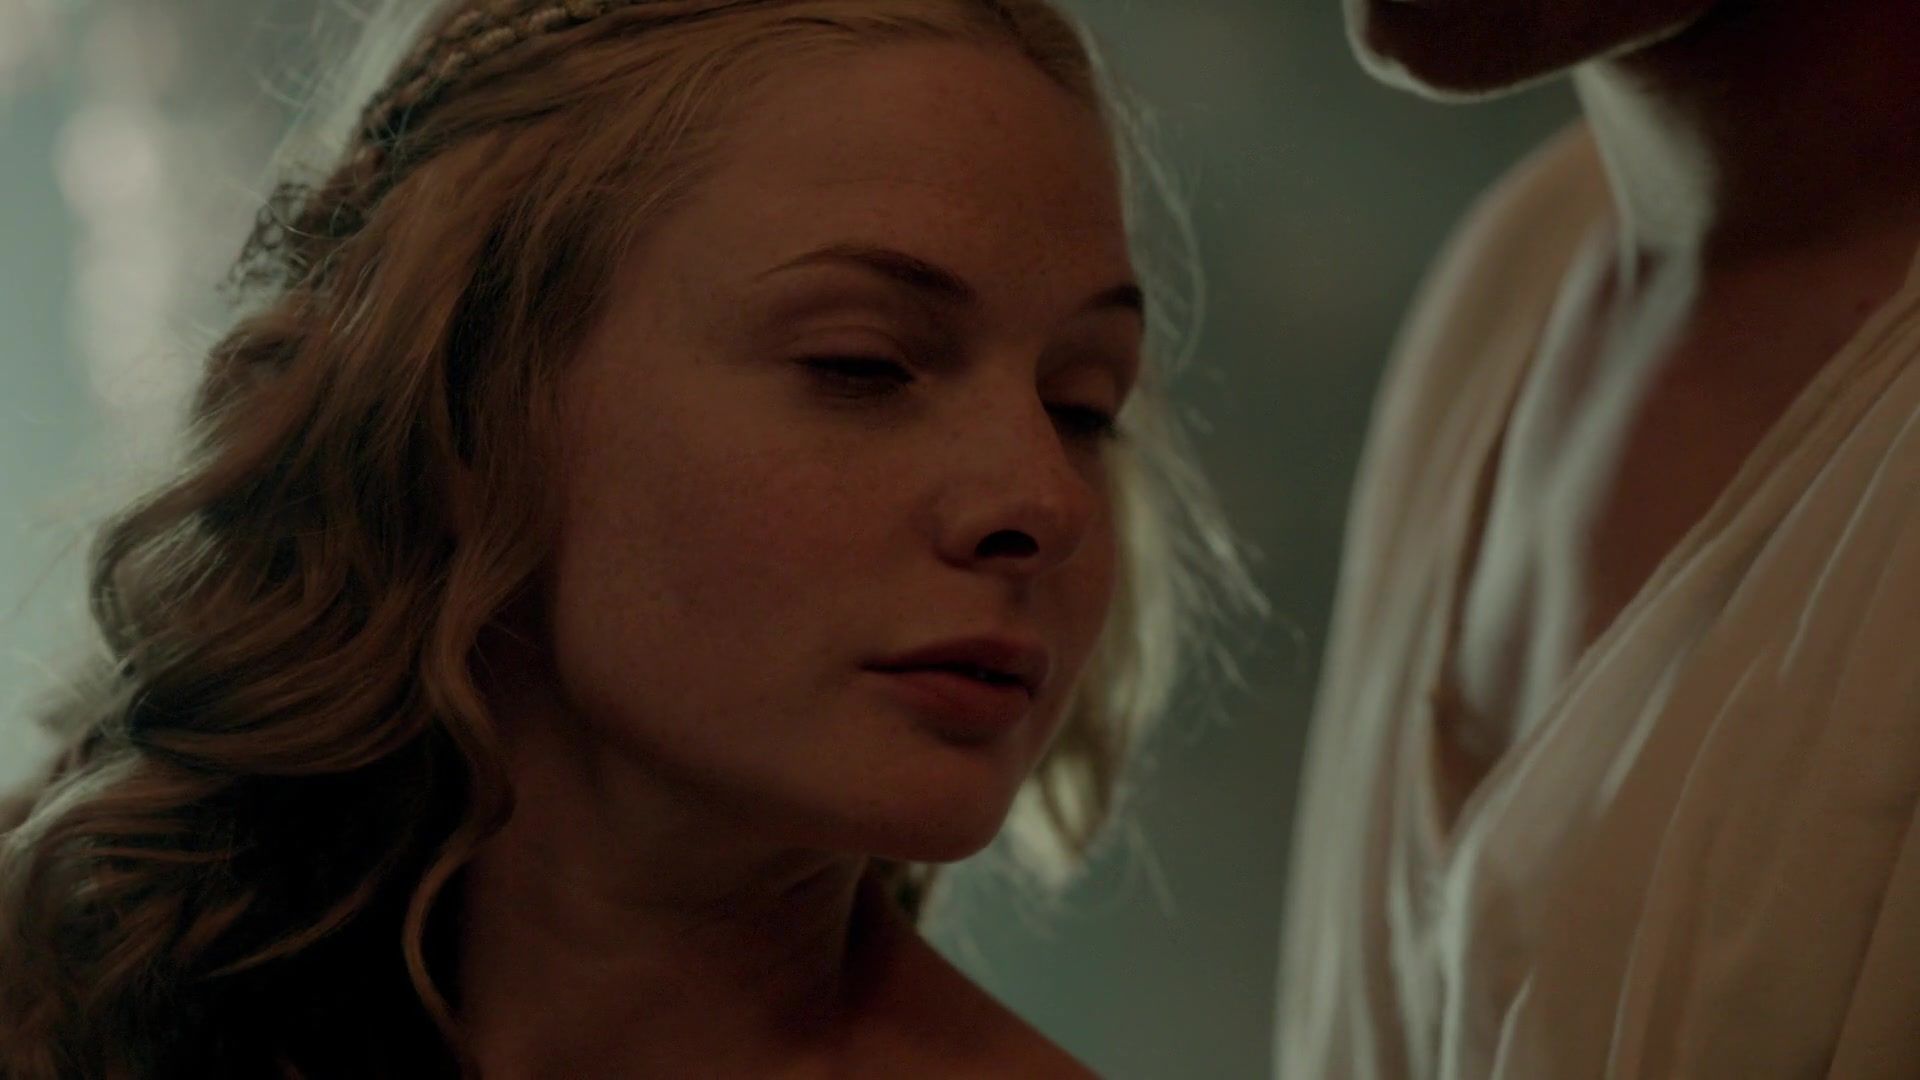 Big Tits Naked Celebs Rebecca Ferguson - The White Queen s01e02 (2013) [uncut] Gay College